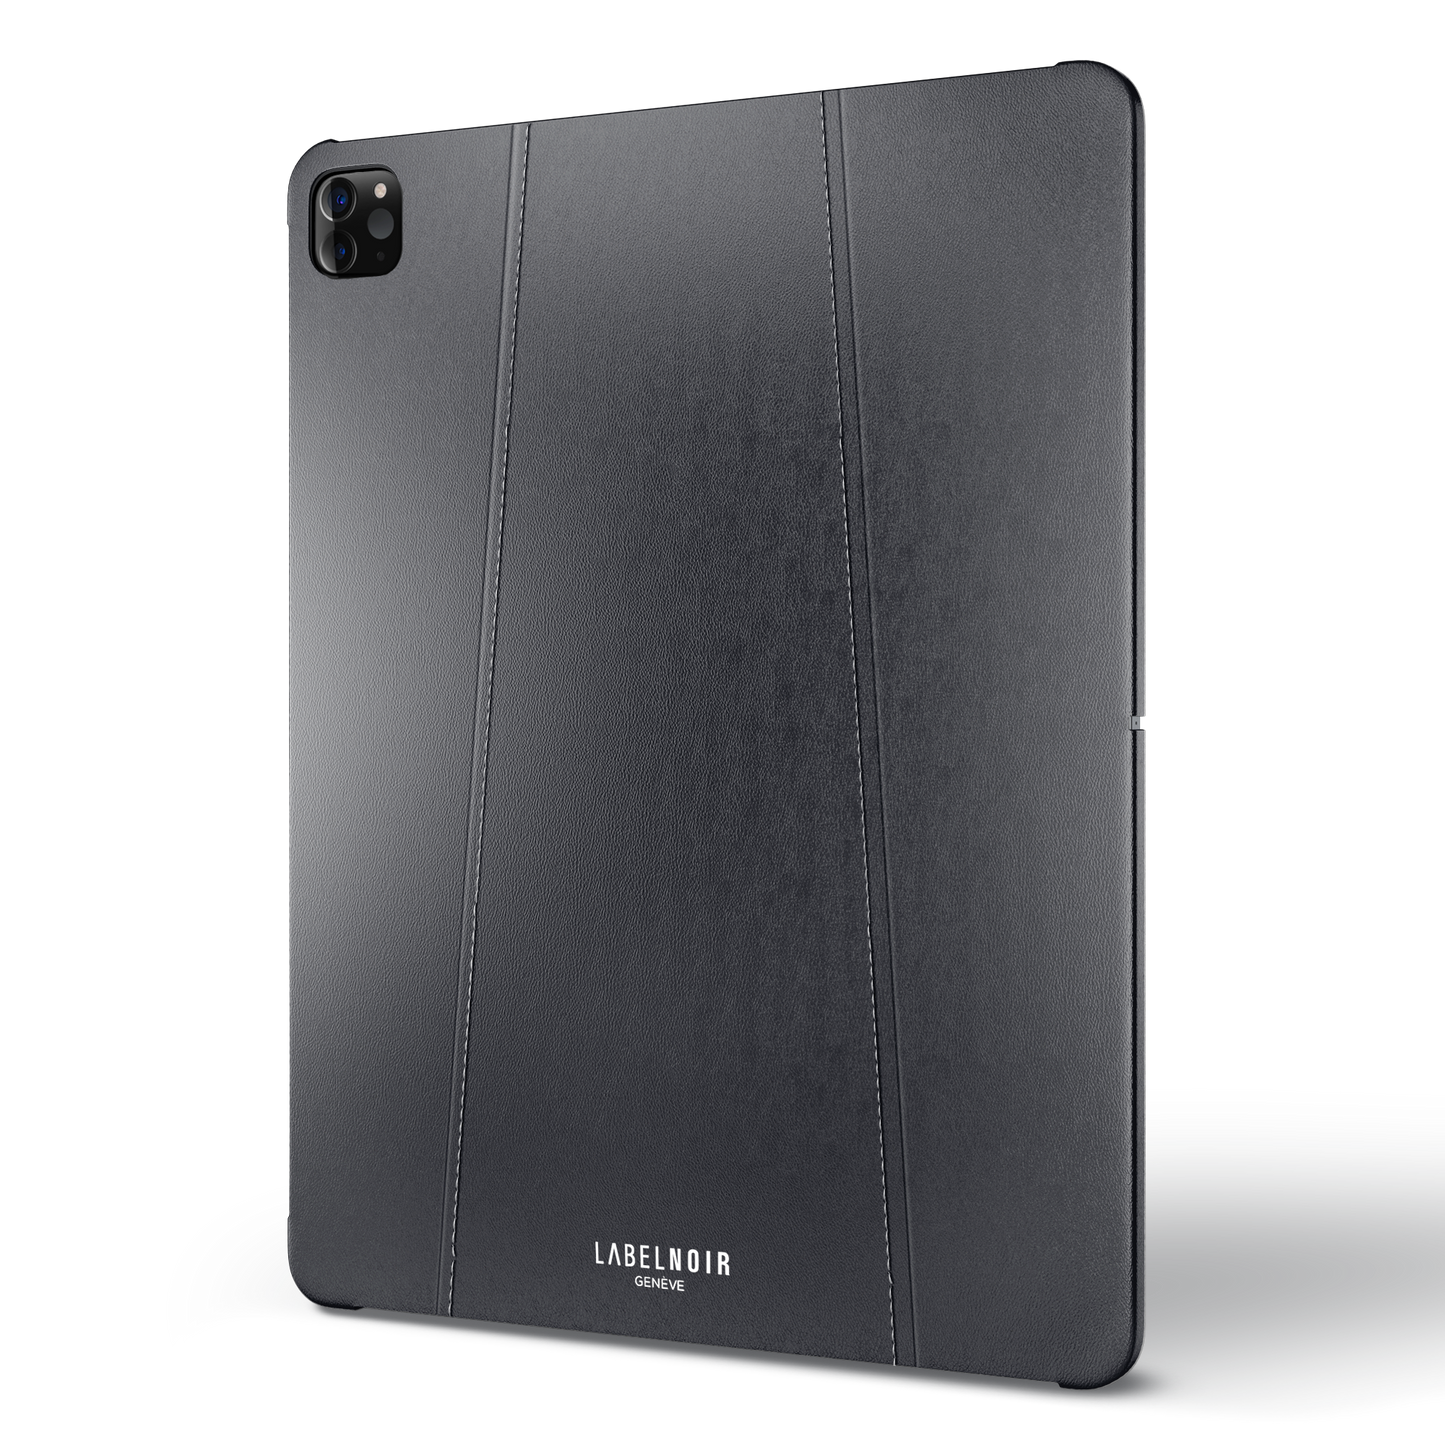 Ipad Pro (2nd-3rd-4th Gen) 11-inch Black Leather Case